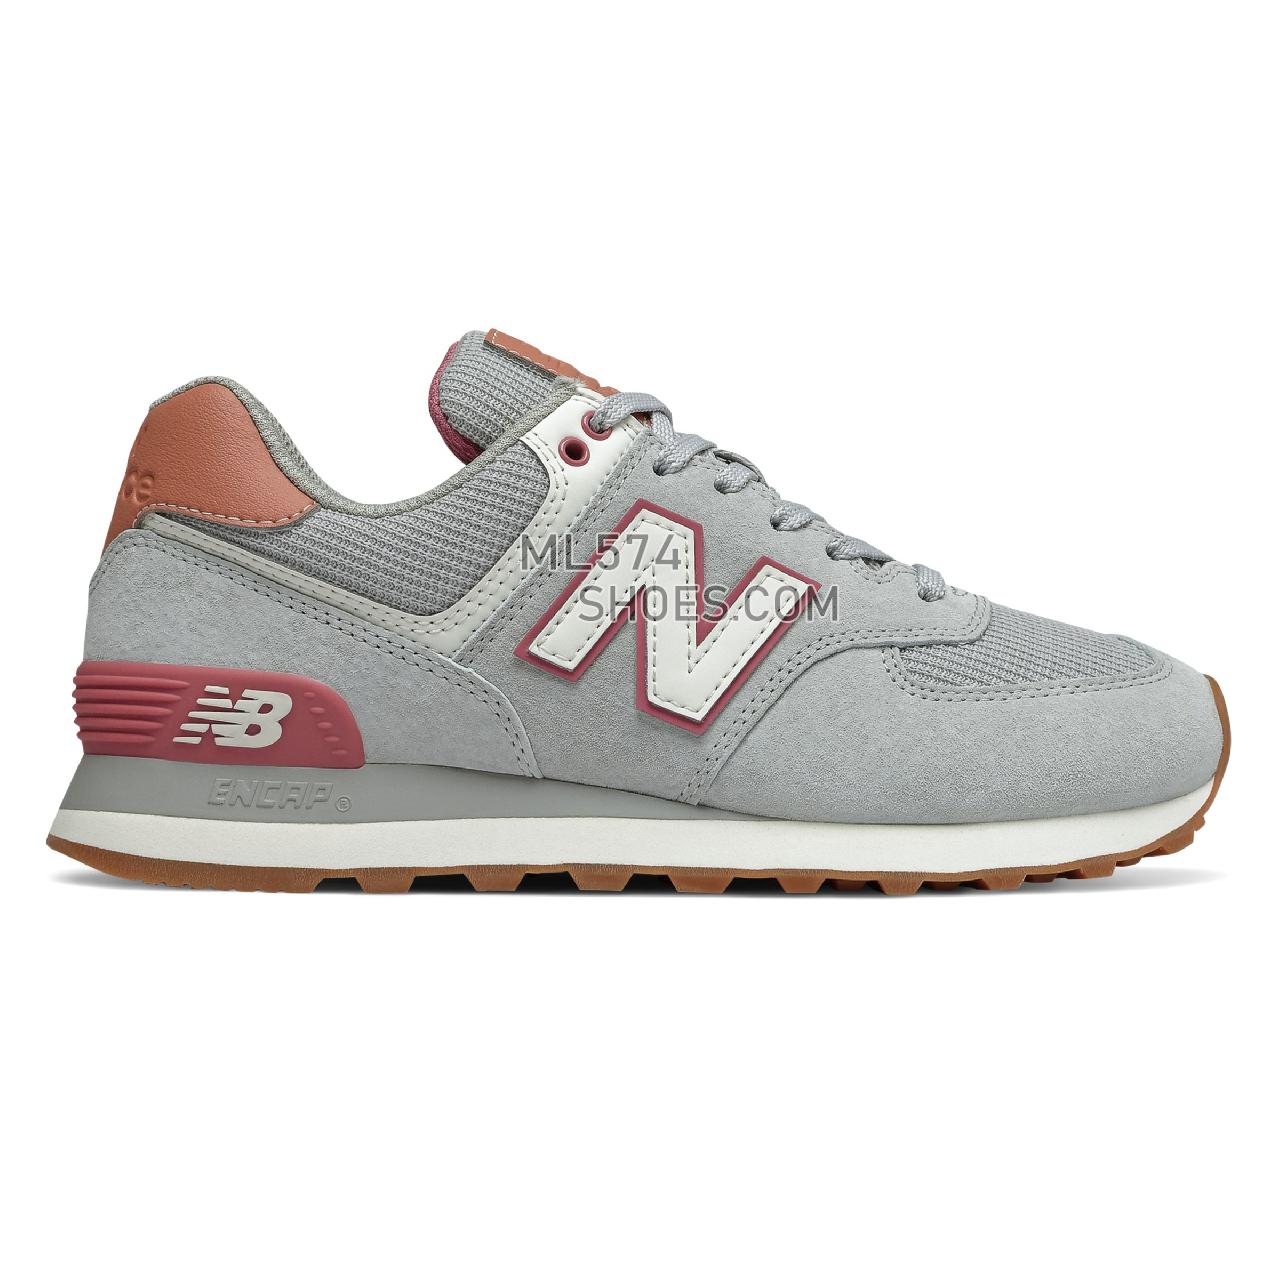 New Balance 574 - Women's Classic Sneakers - Rain Cloud with Off Road - WL574BCZ